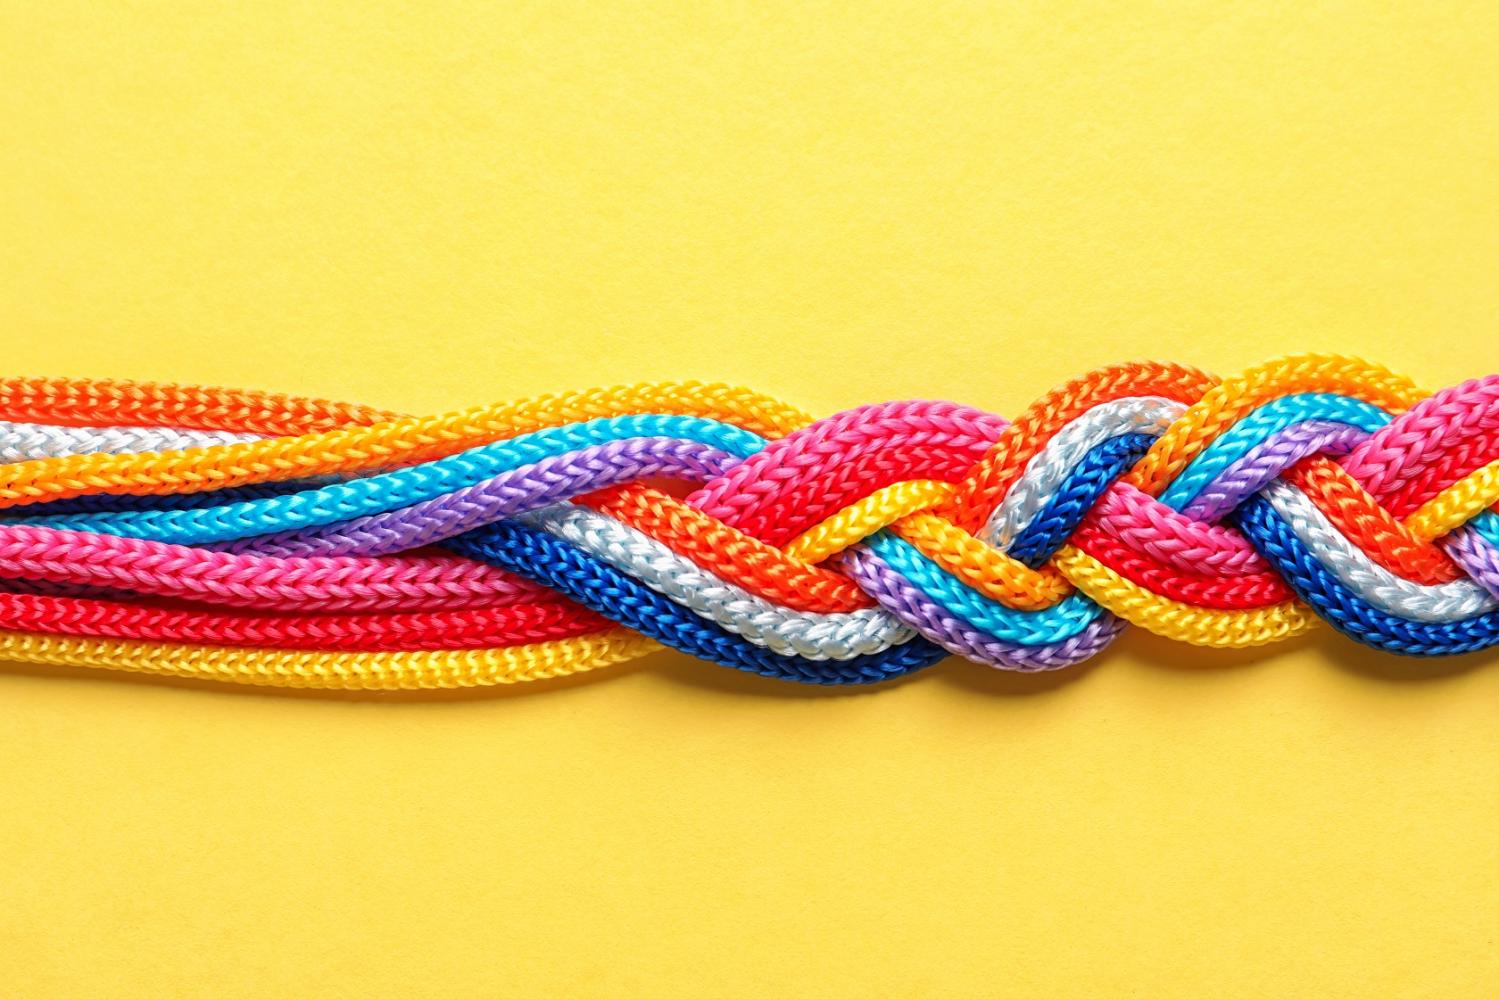 Multi-colored, braided rope on a yellow background.